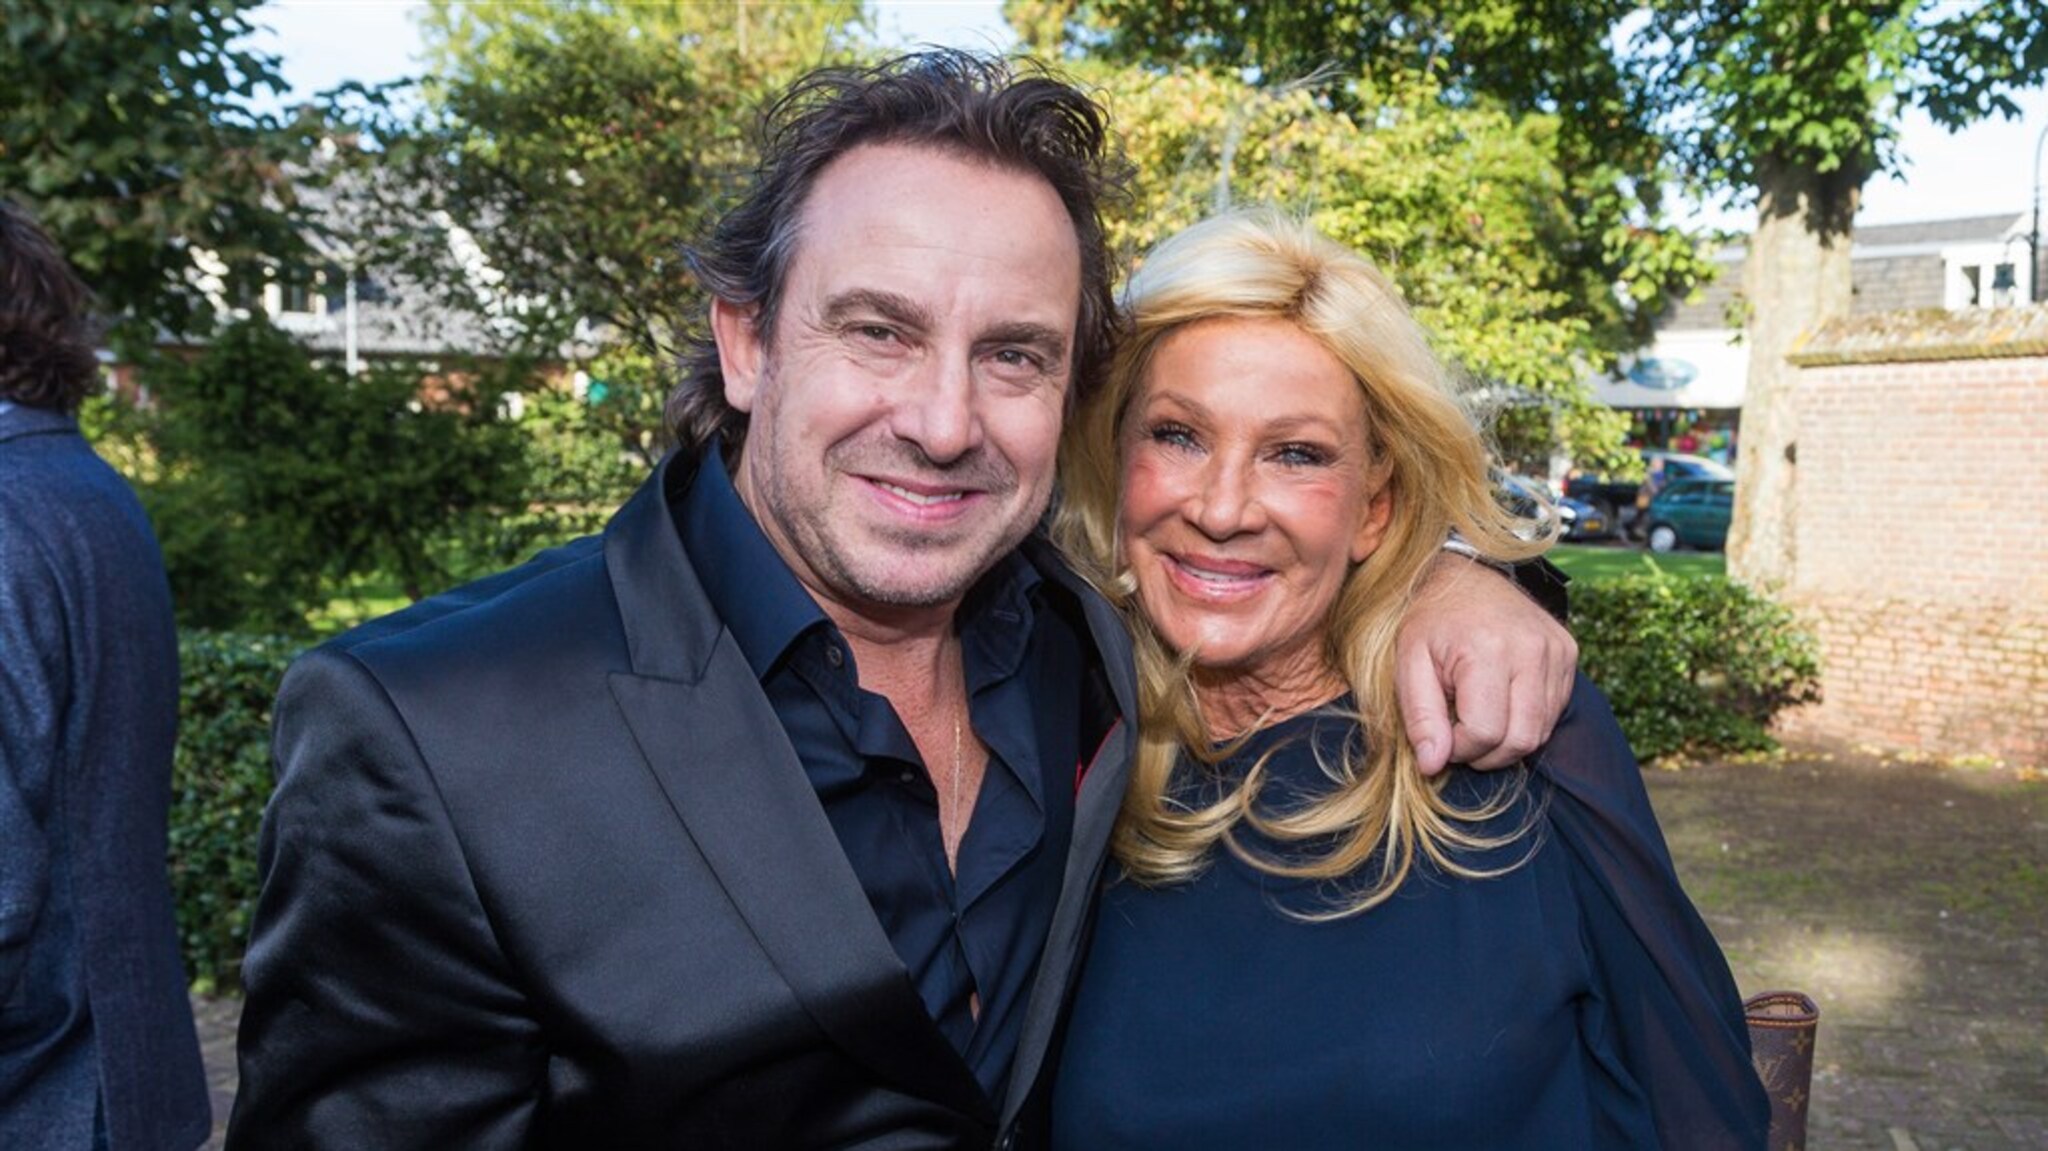 Mother Marco Borsato is emotional: "Destroyed at once"